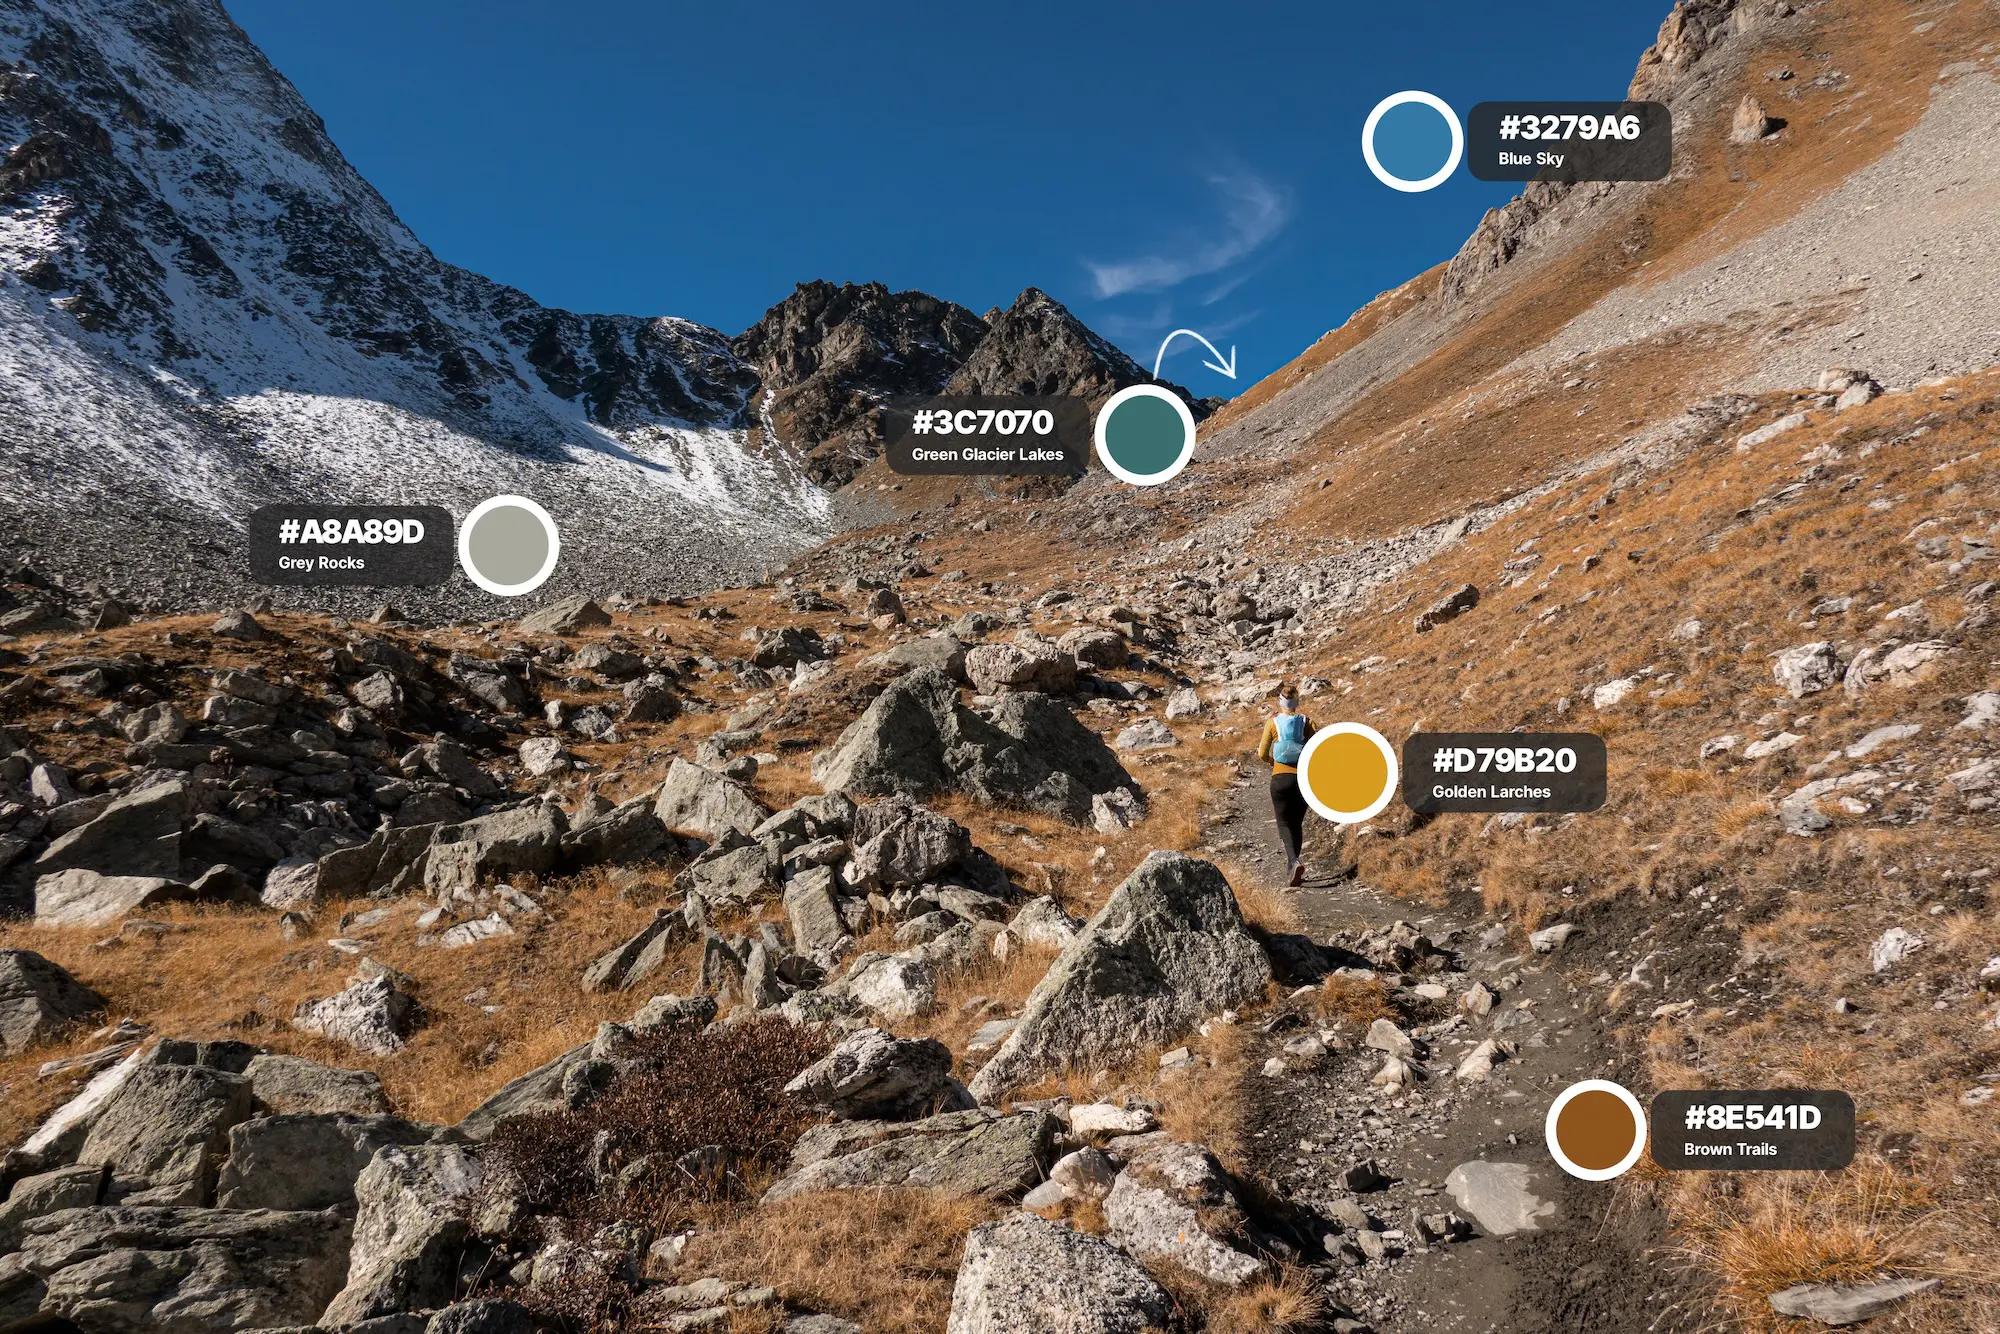 The color palette of the Pas de Chèvres at a glance: Brown trails, golden larches, turquoise glacial lake, gray rock and blue sky.